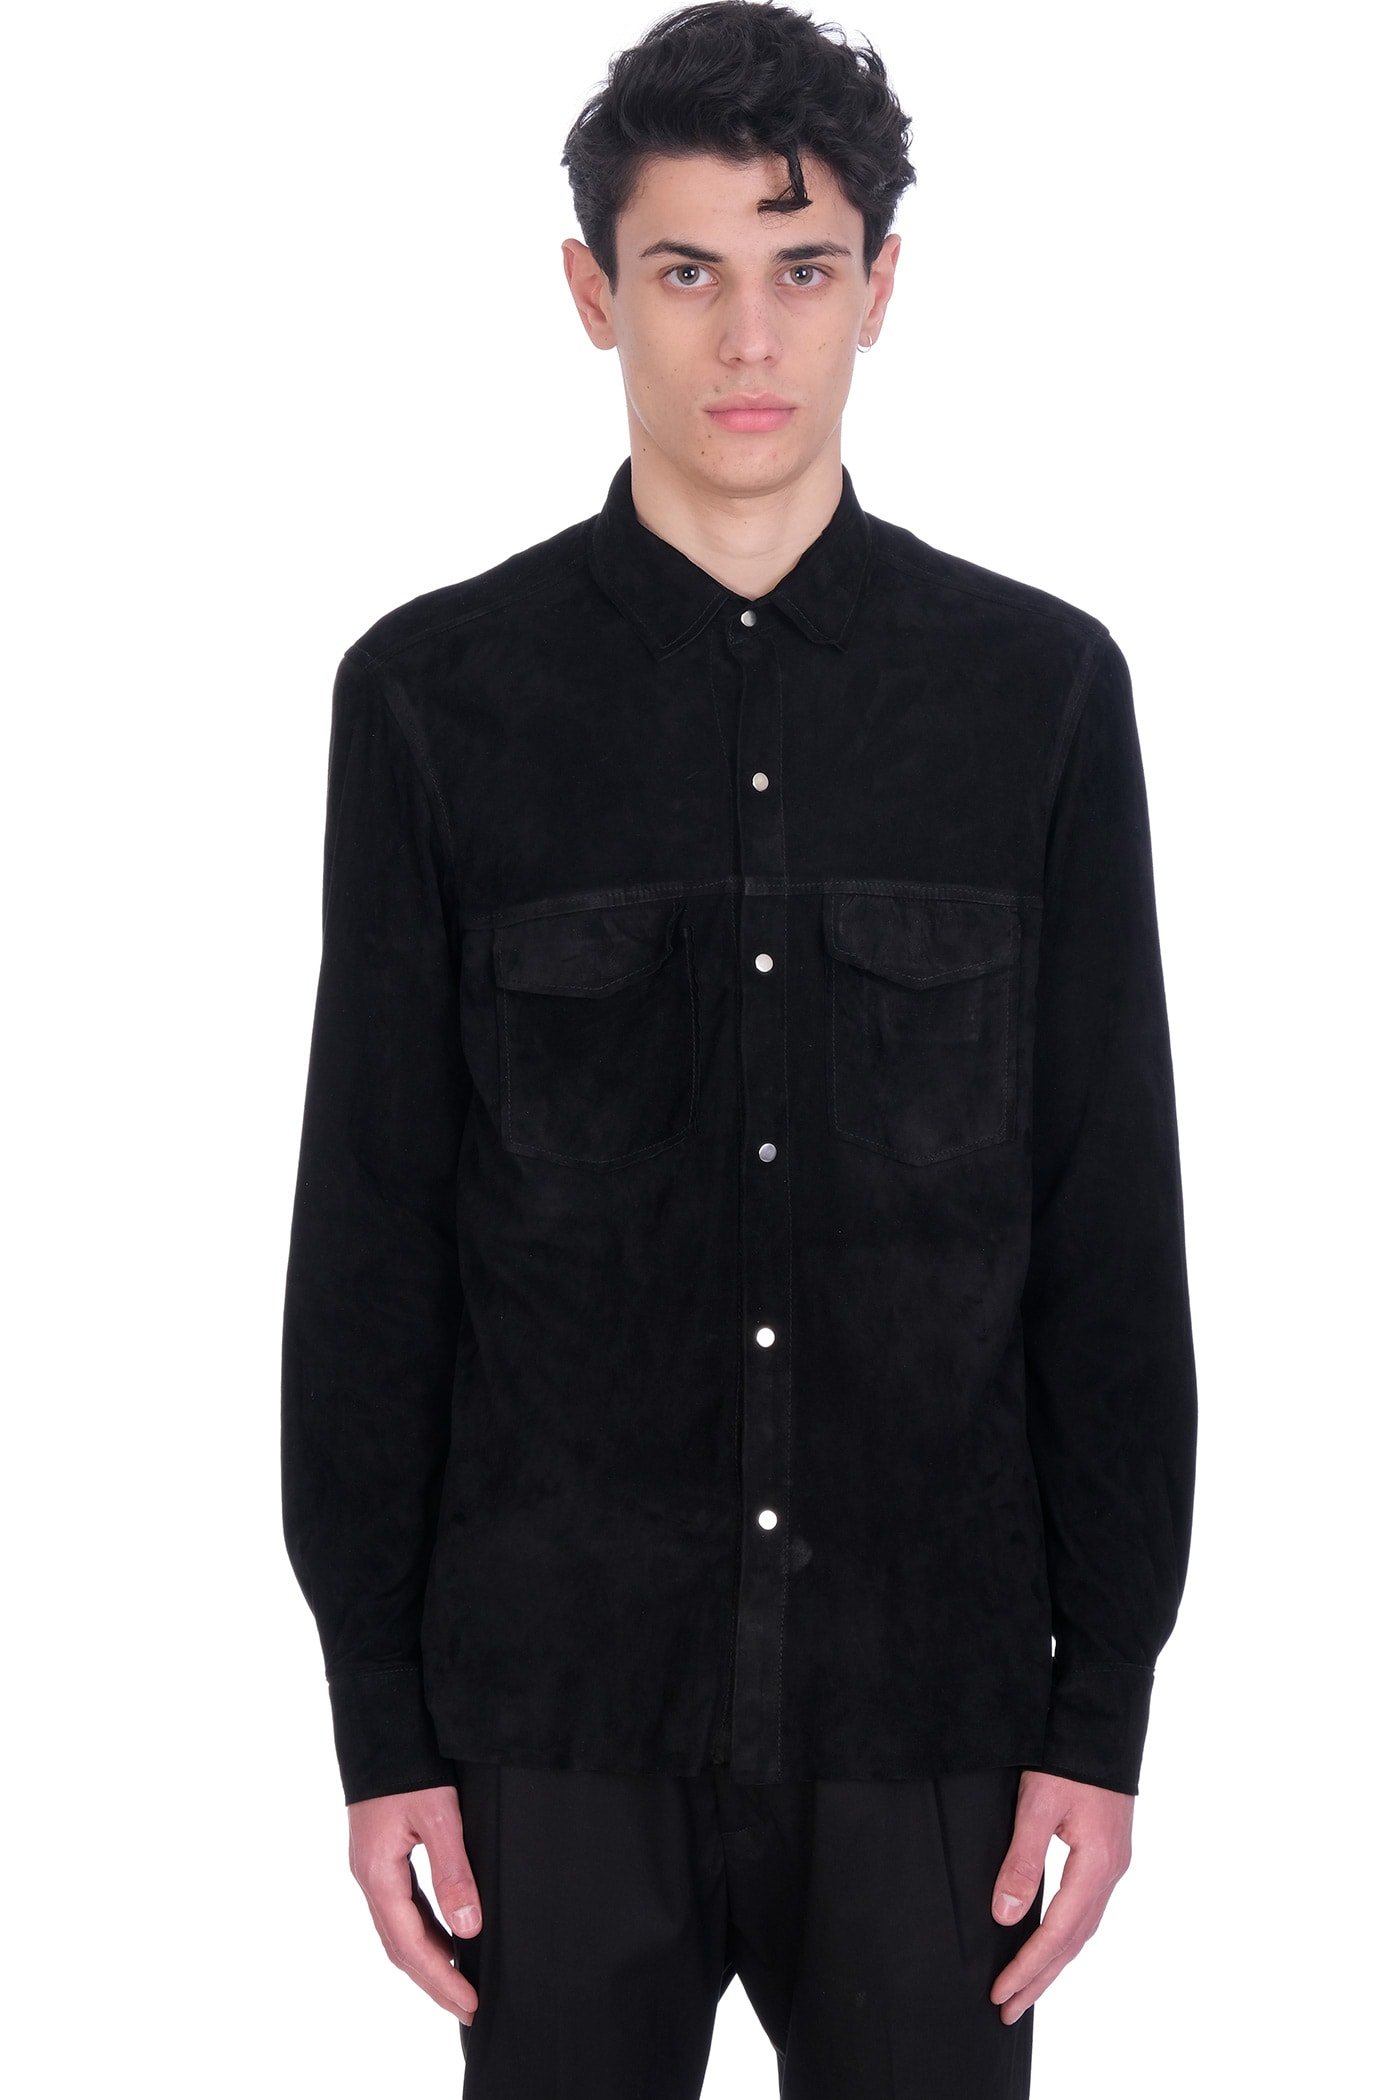 Low Brand Shirt In Black Leather